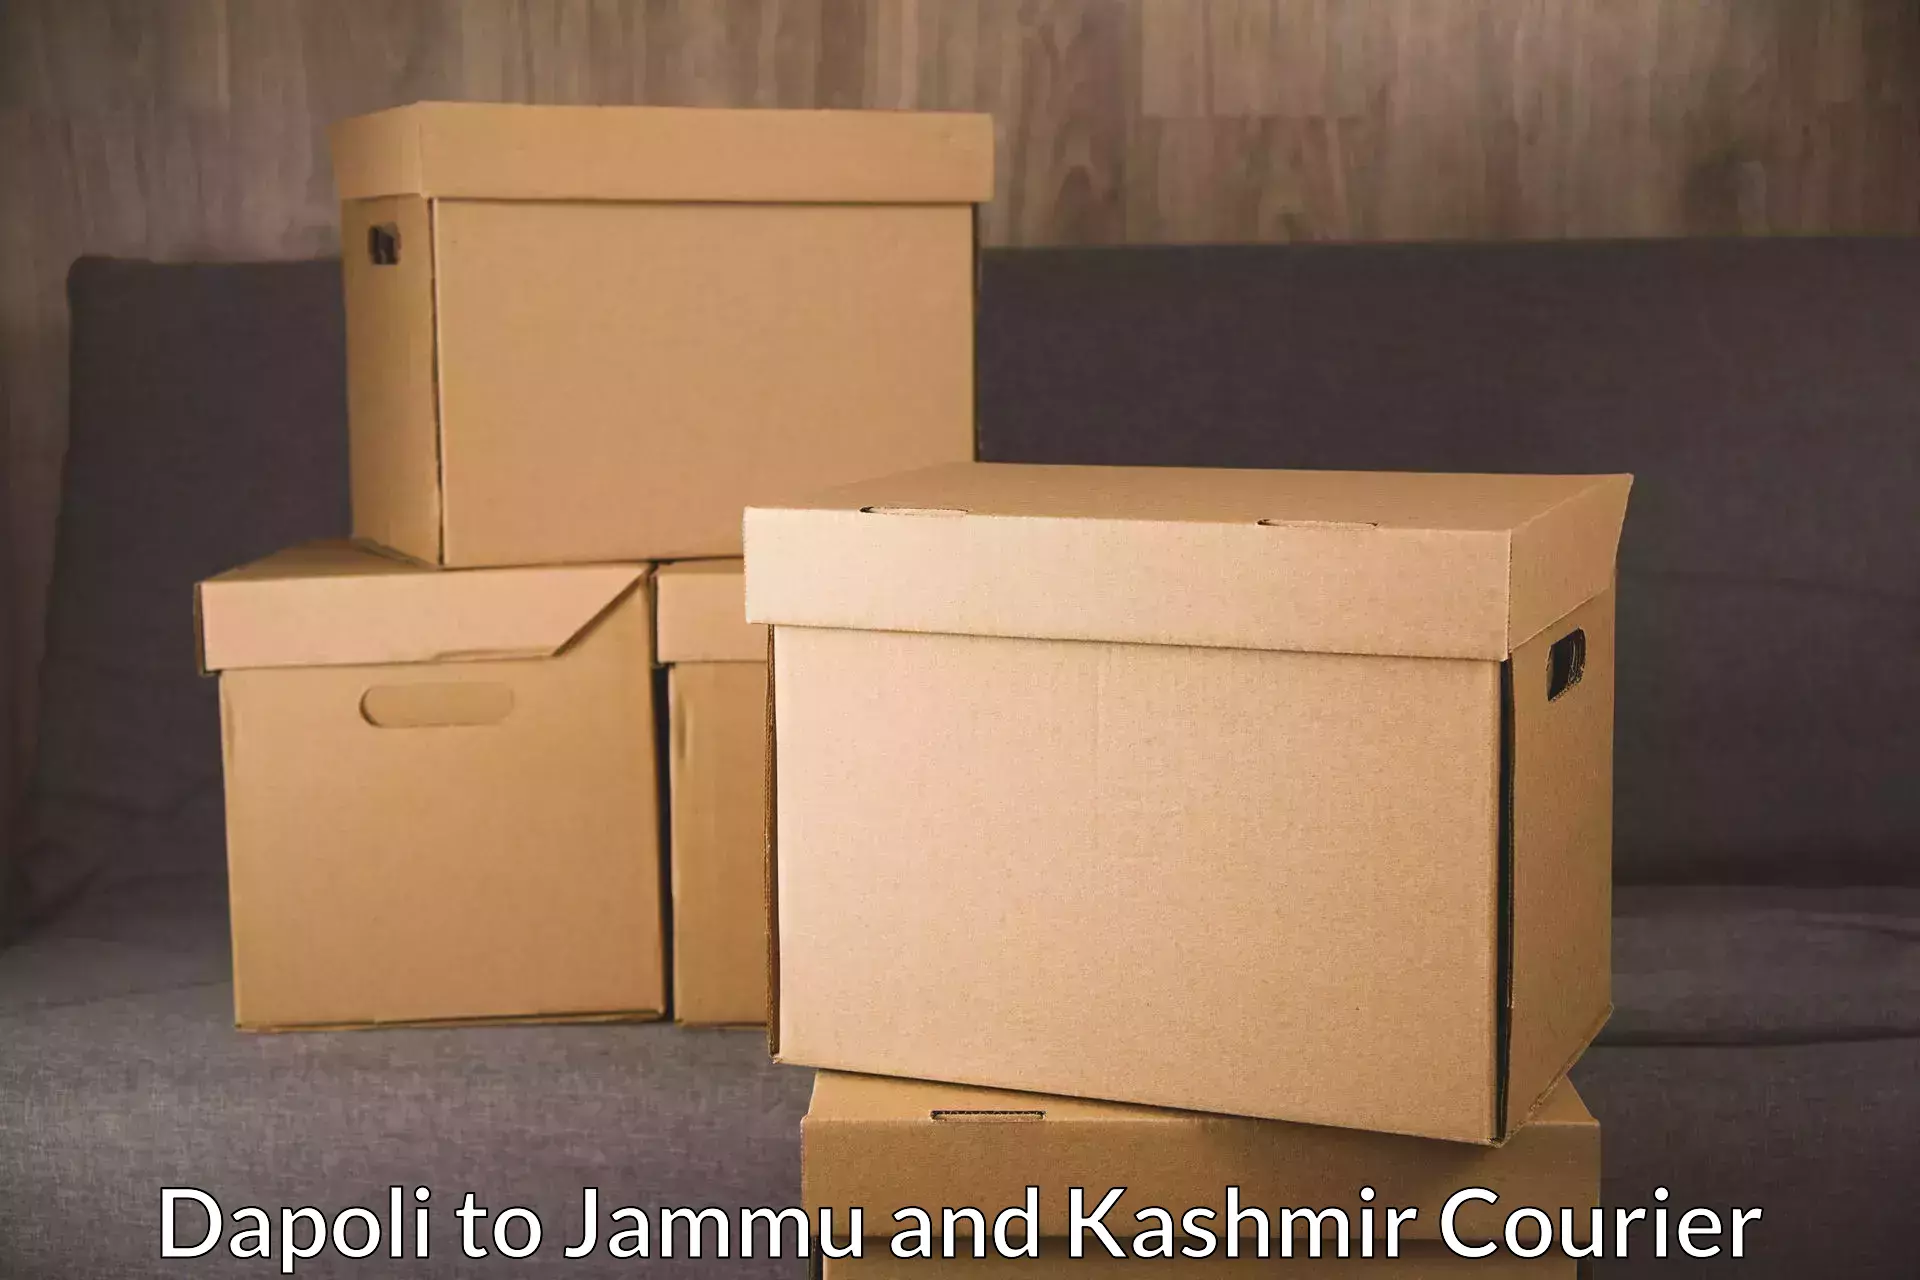 Reliable courier service Dapoli to Budgam